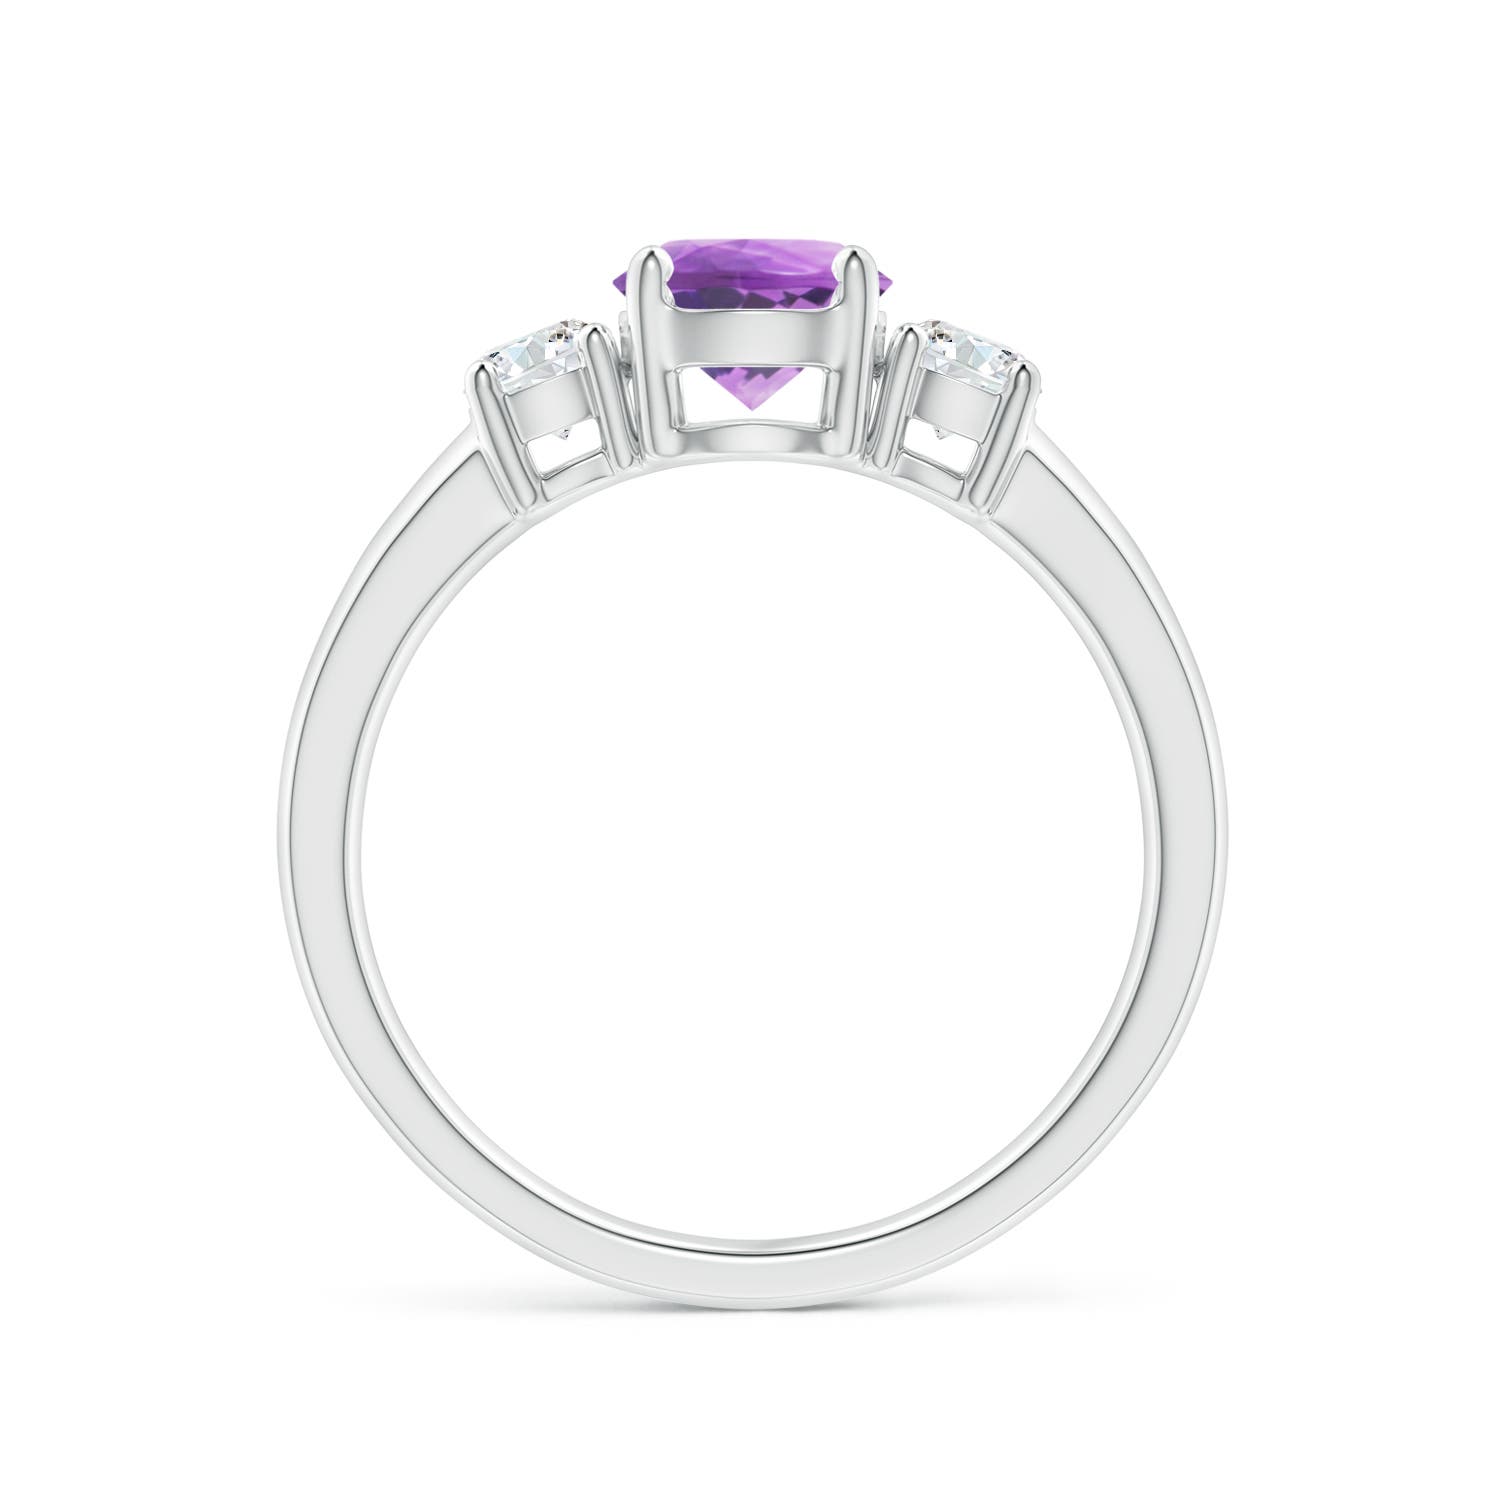 A - Amethyst / 1.12 CT / 14 KT White Gold